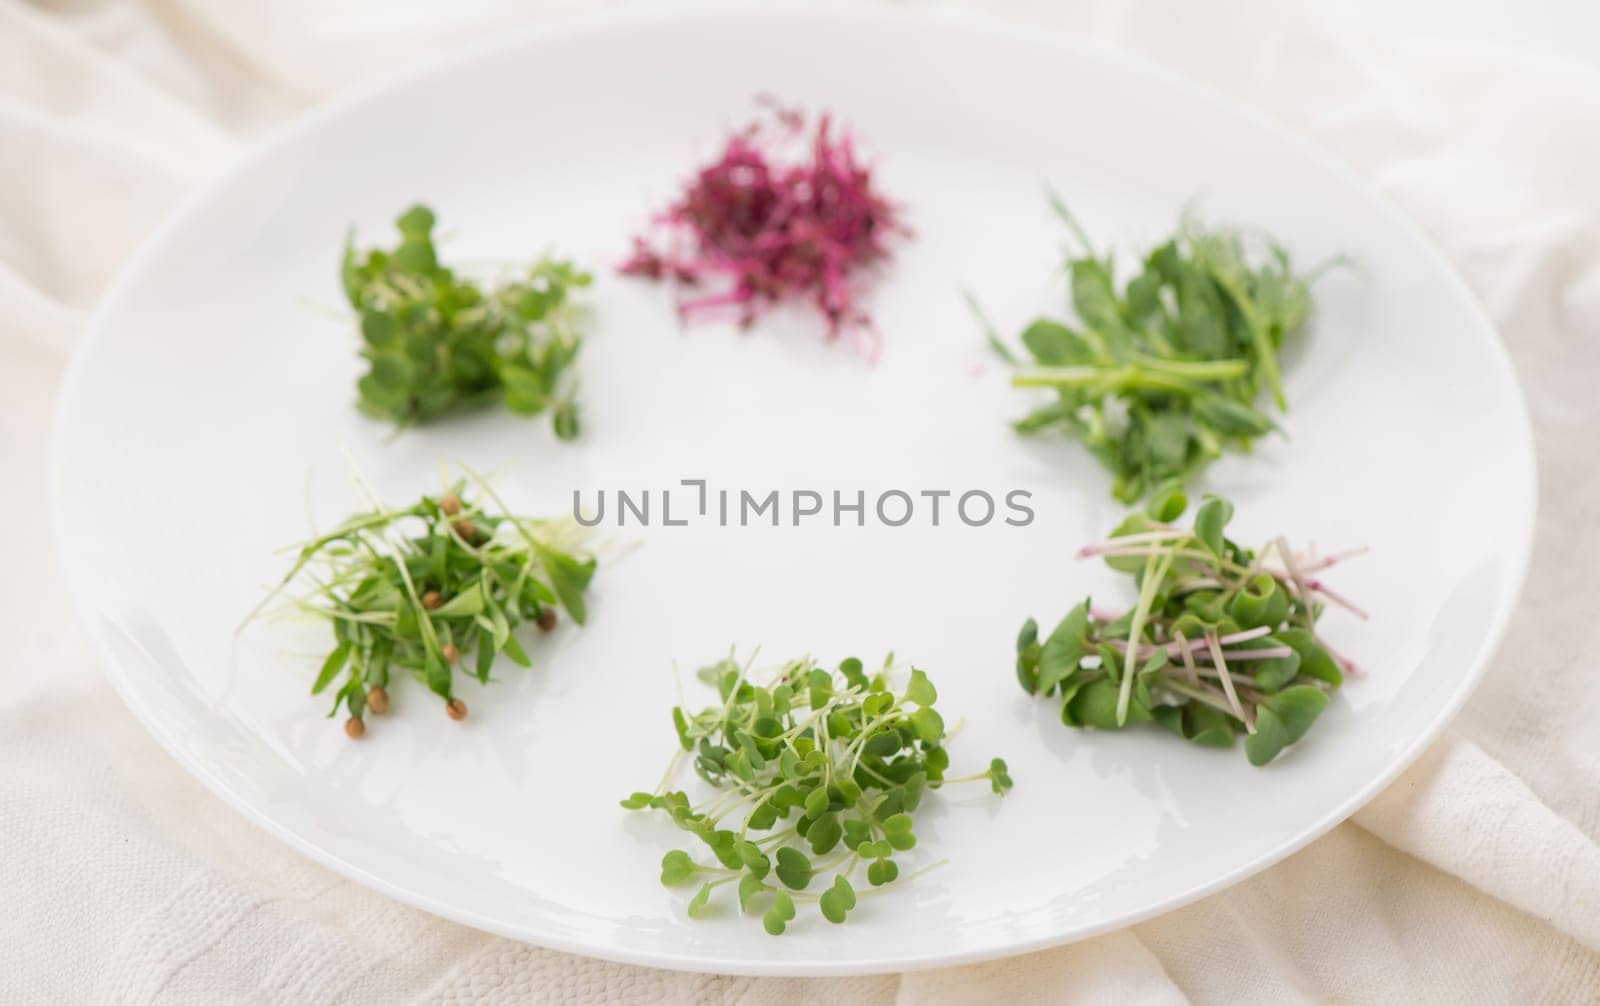 The concept of a healthy diet, the cultivation of microgreens - red amaranth, mustard, arugula, peas, cilantro on a white plate by aprilphoto